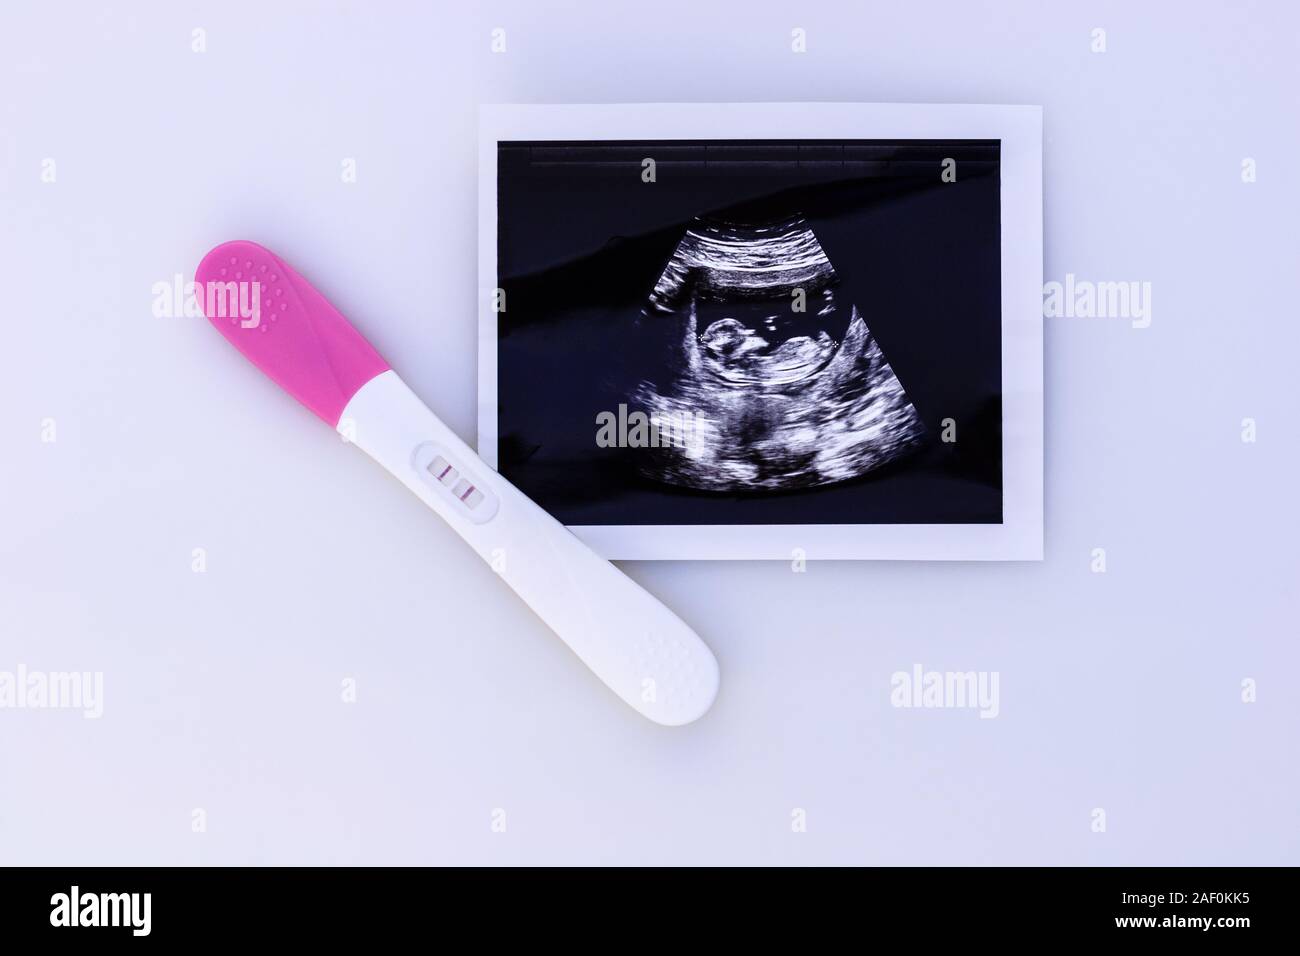 Pregnancy test showing a positive result and ultrasound image isolated on white background. Stock Photo